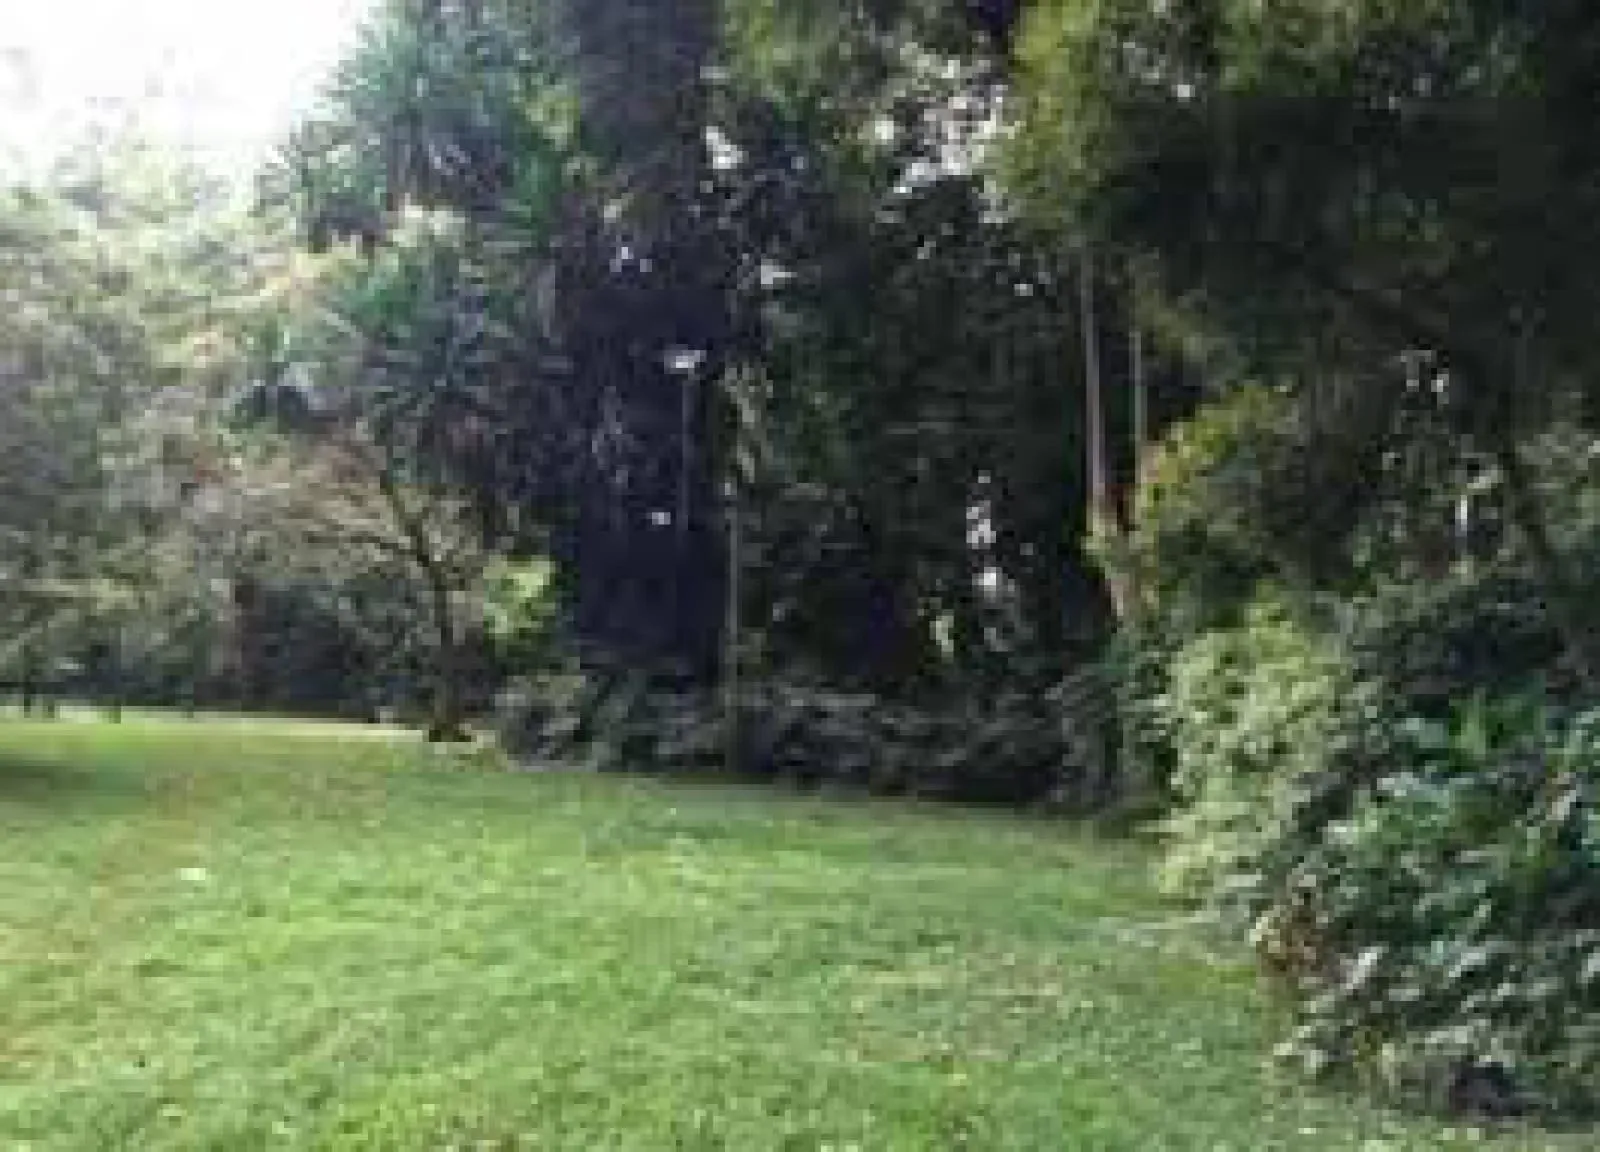 Land for sale in Karen tumbili road 2.5 Acres Ready Title Deed QUICK SALE Exclusive🔥